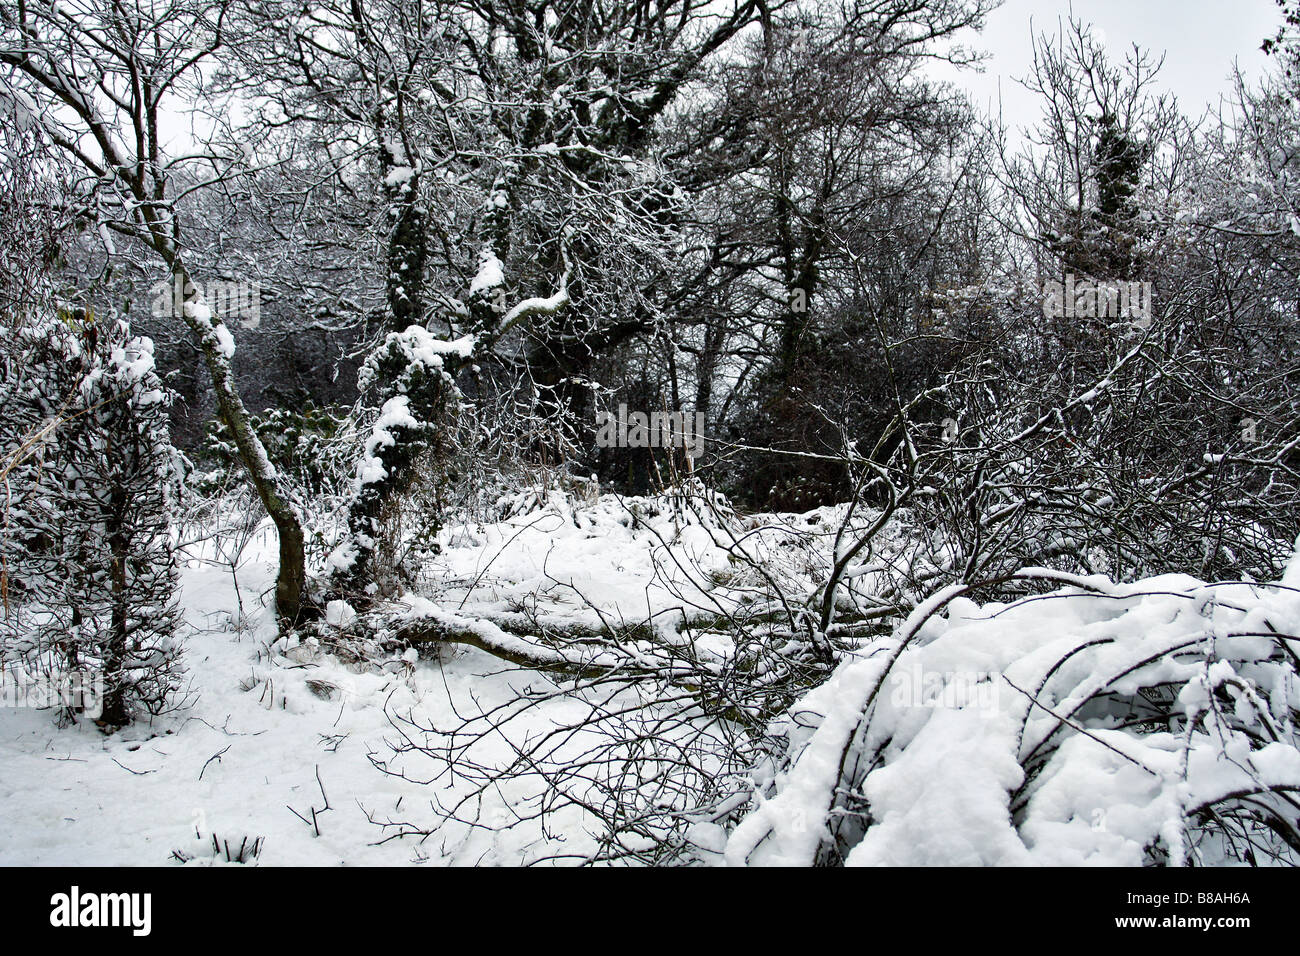 HEAVY SNOWFALL AND STRONG WINDS HAVE SEVERELY DAMAGED THIS CERCIS SILIQUASTRUM Stock Photo